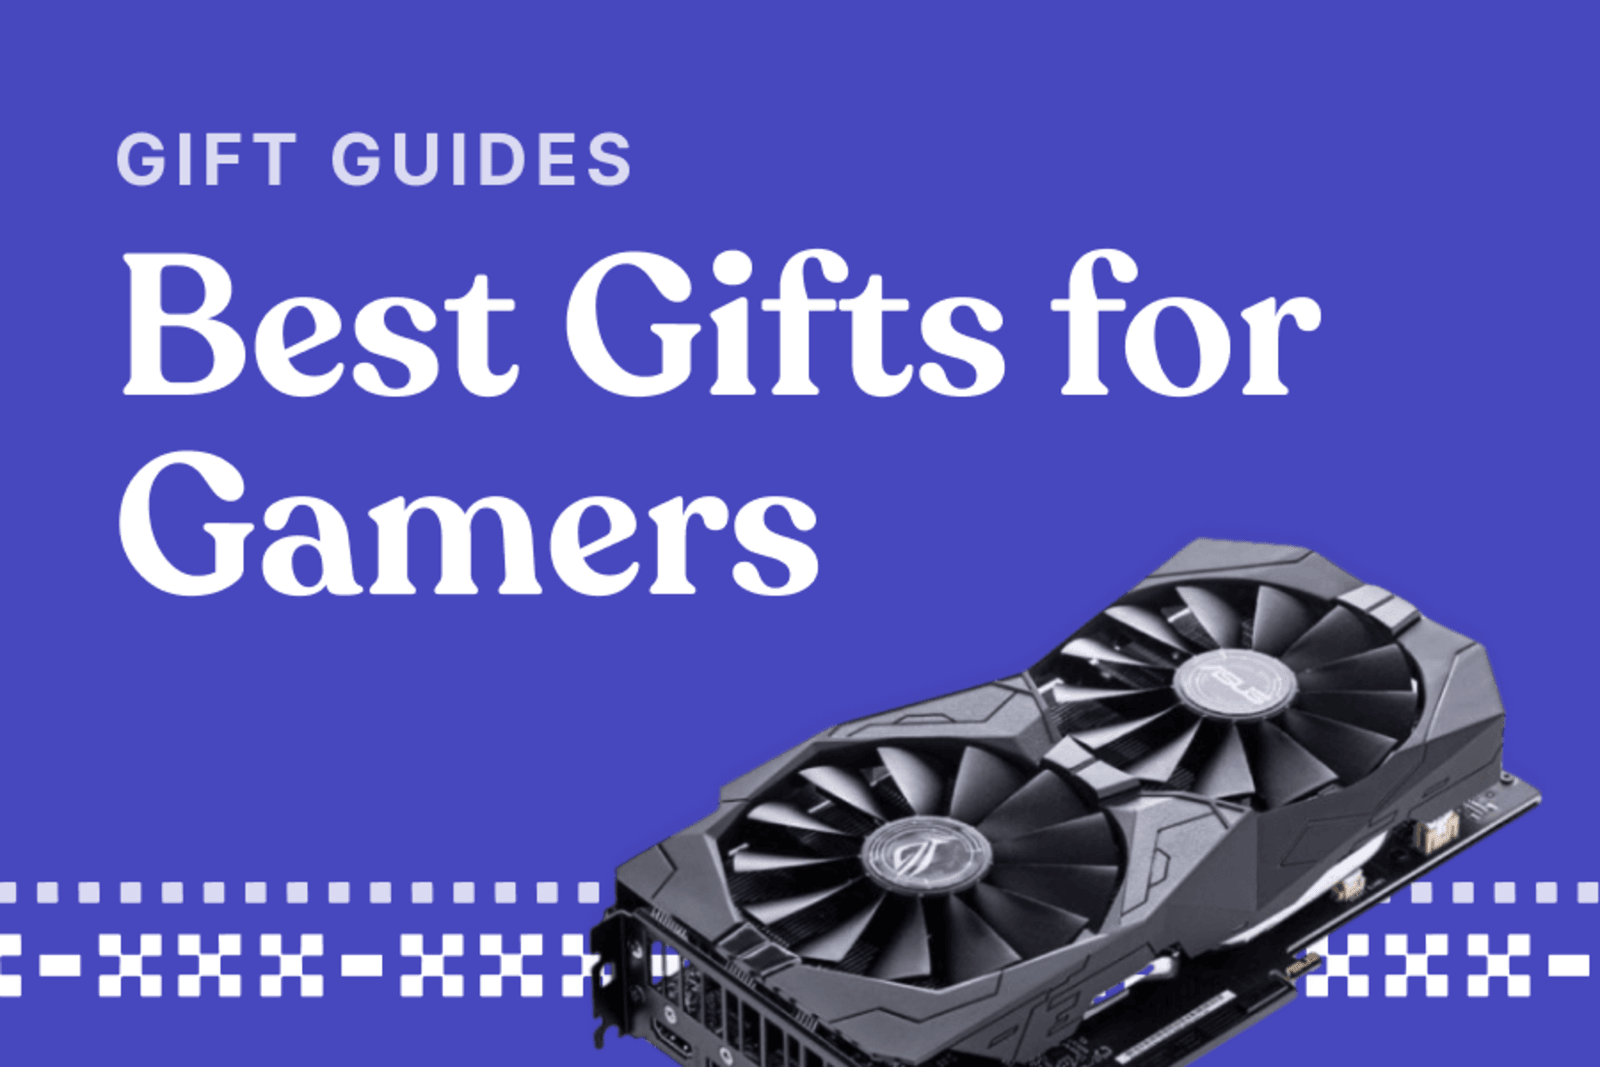 Gamer Holiday Gift Guide!